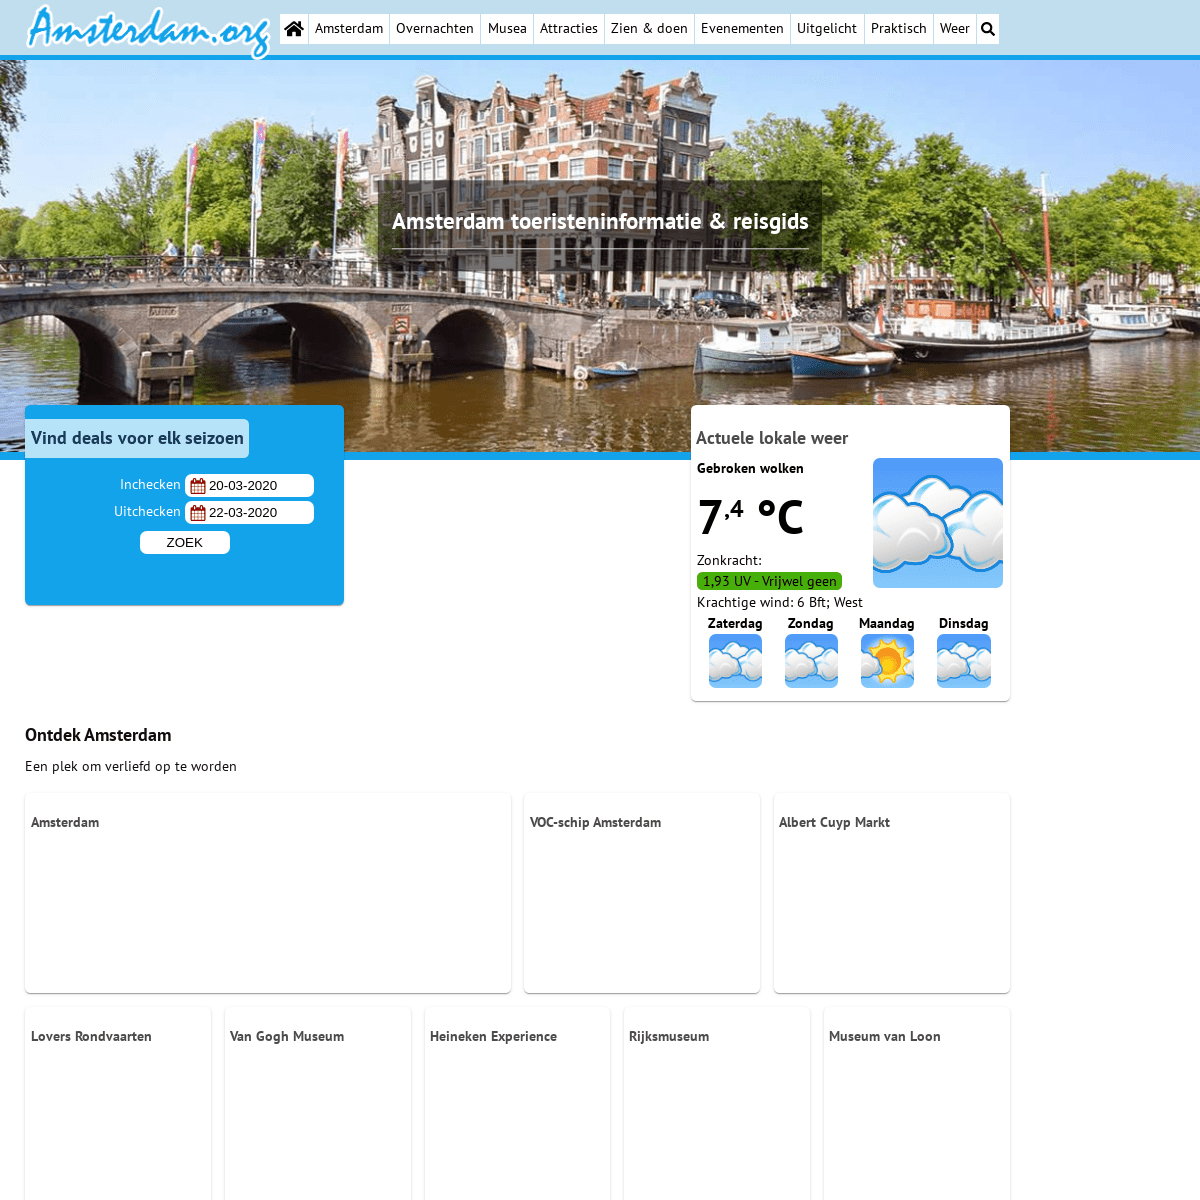 A complete backup of amsterdam.org